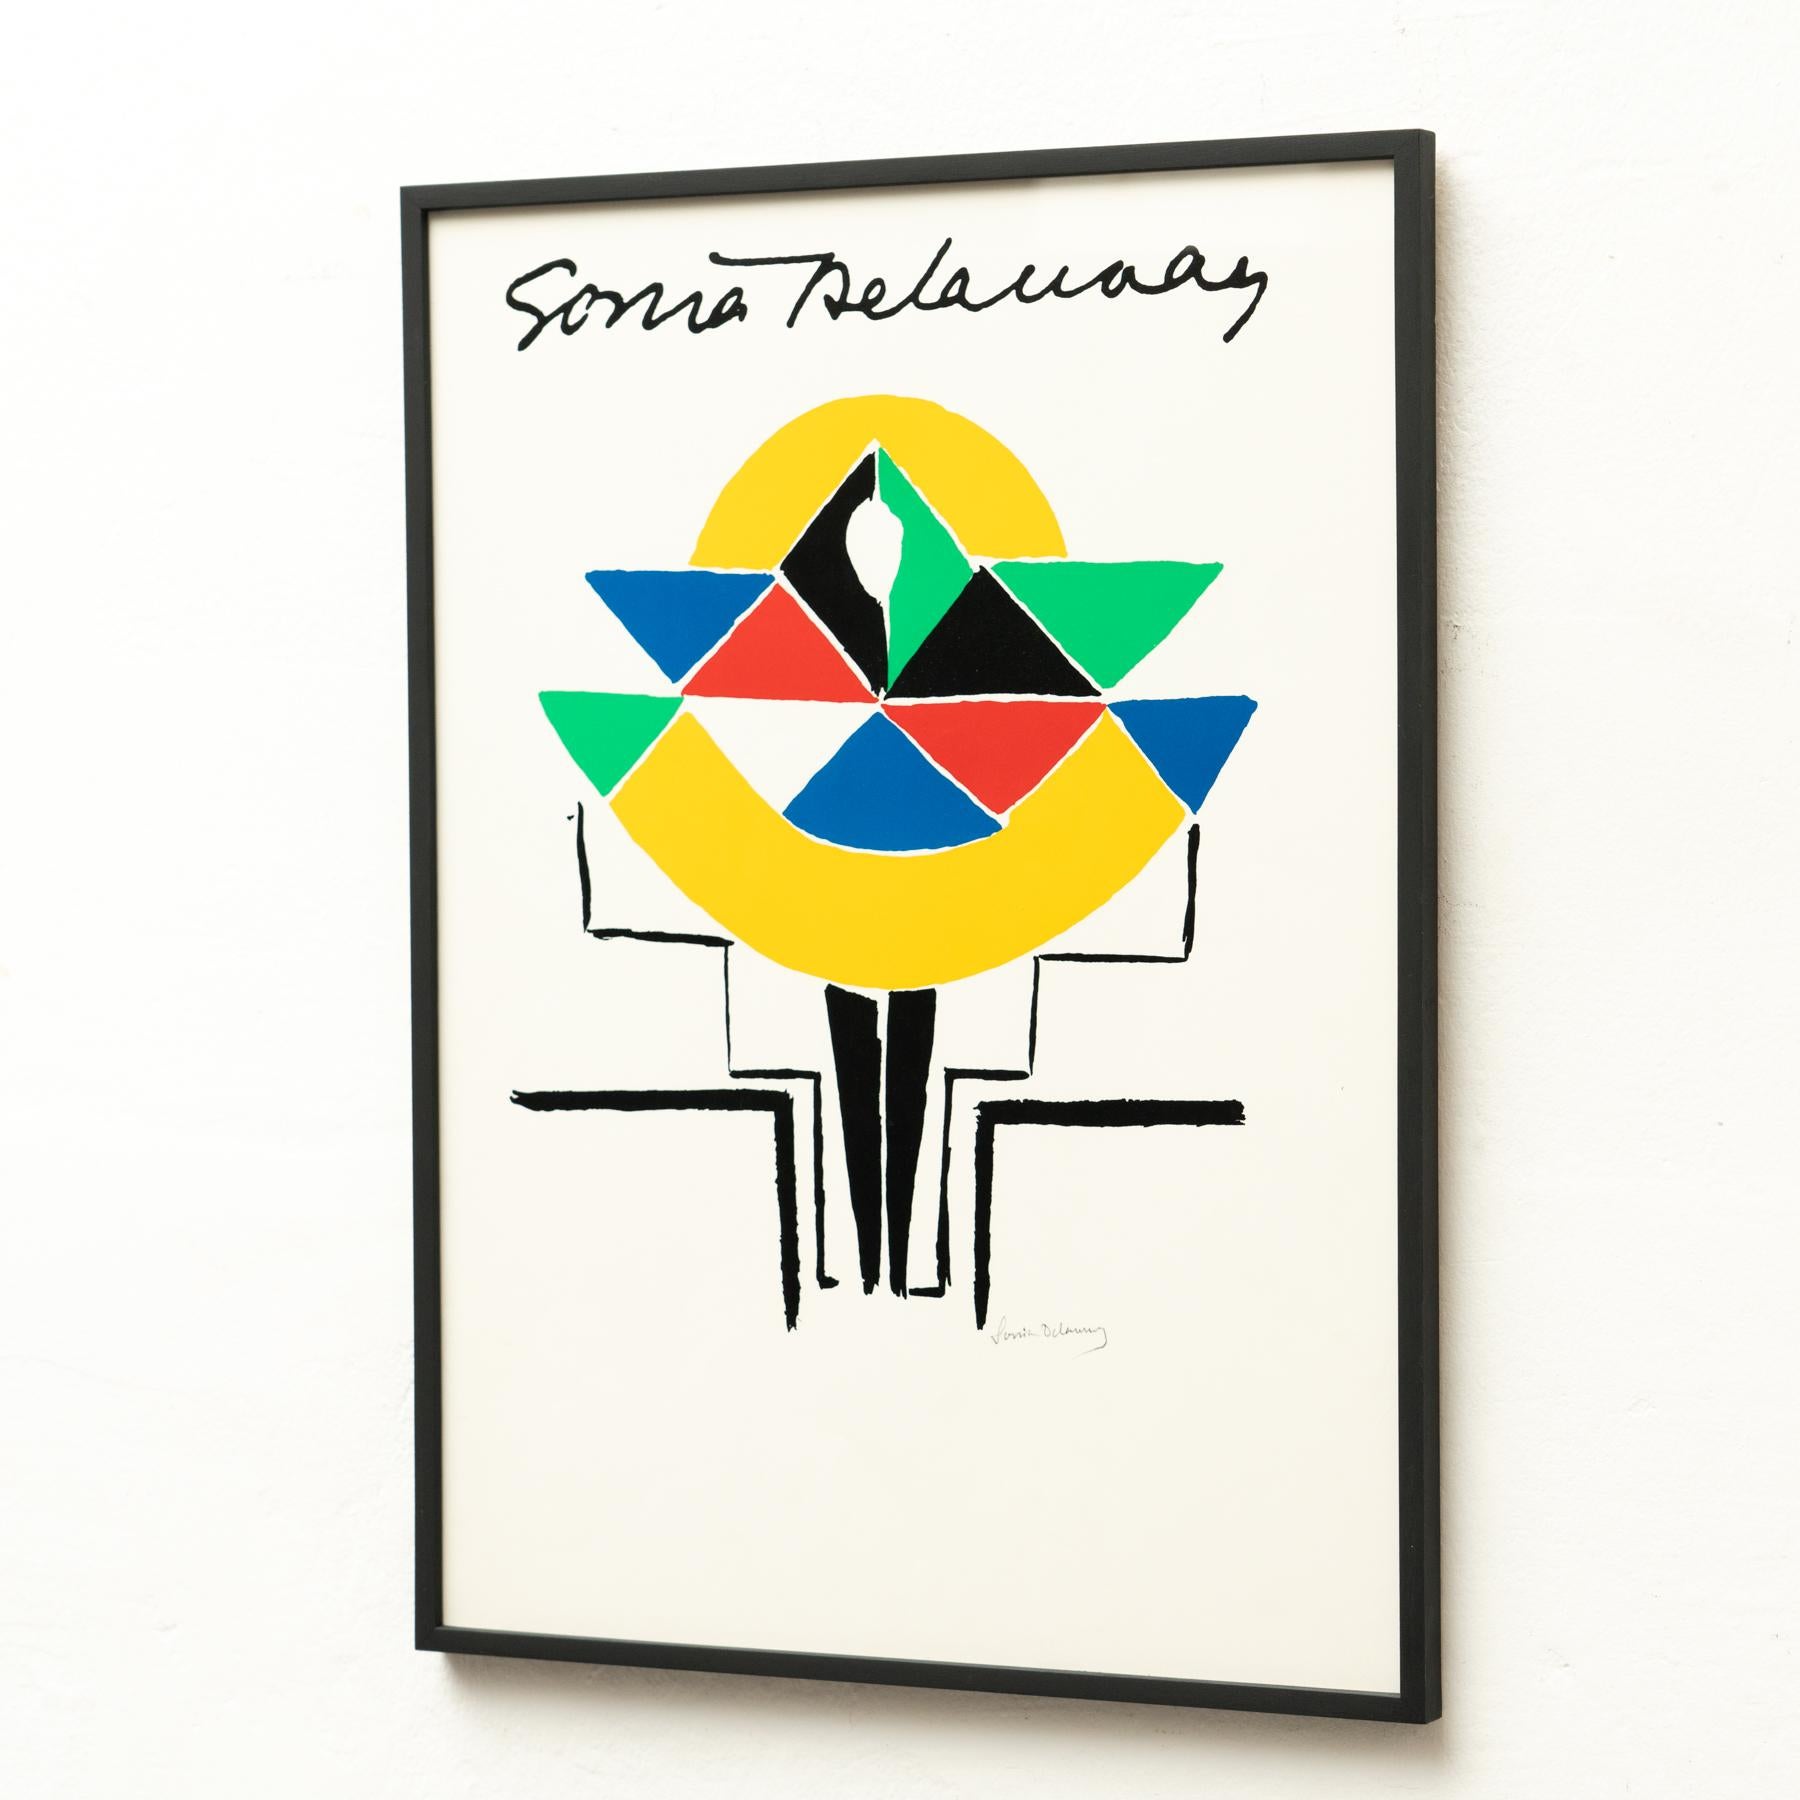 Sonia Delaunay Framed Lithography, circa 1970 In Good Condition For Sale In Barcelona, Barcelona